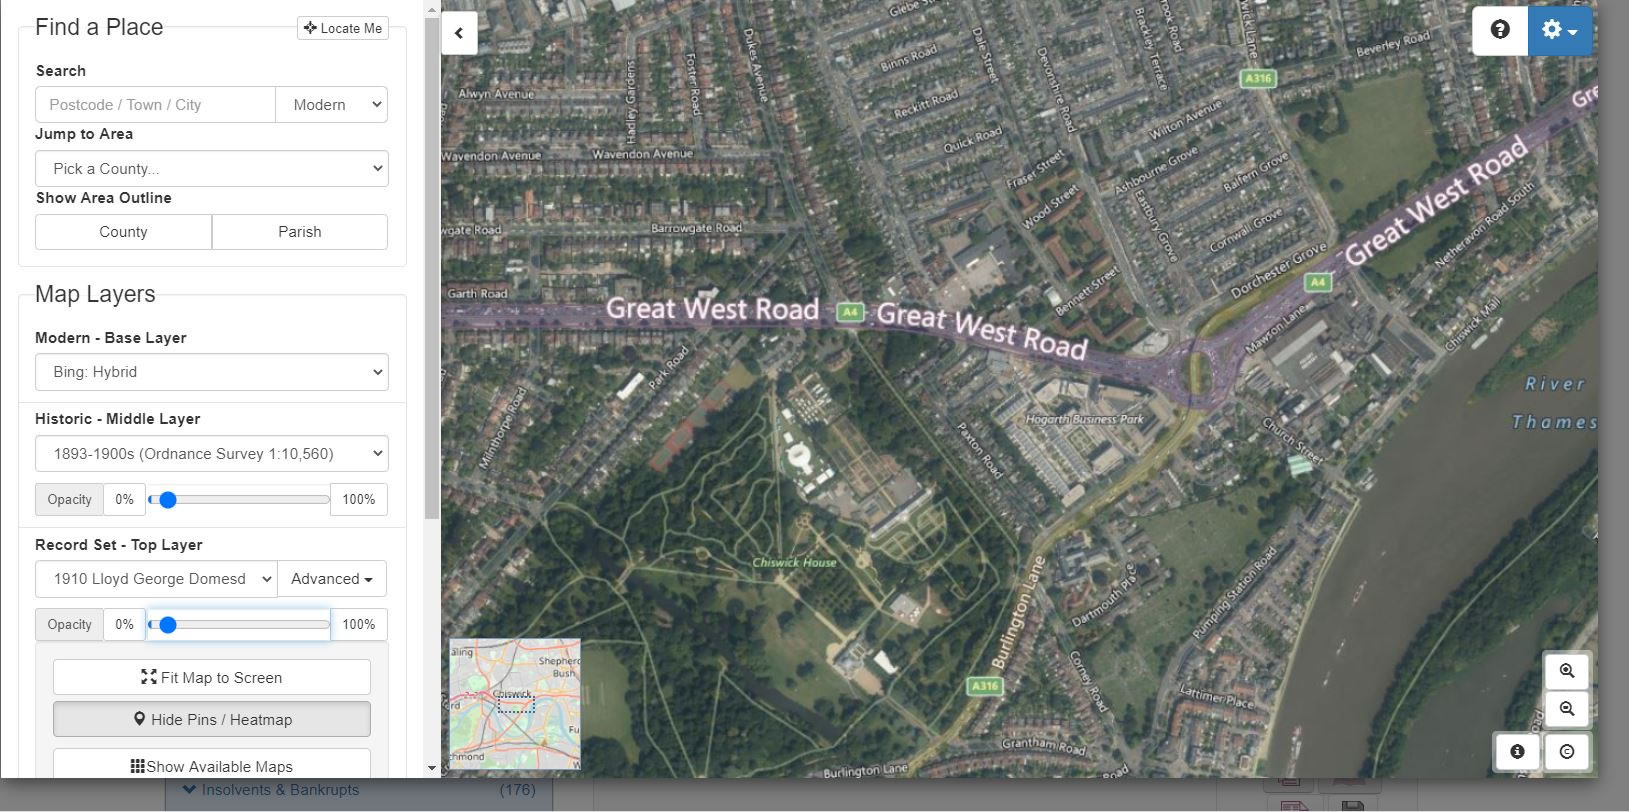 The same georeferenced Bing Hybrid map shows Great West Road cutting through former houses